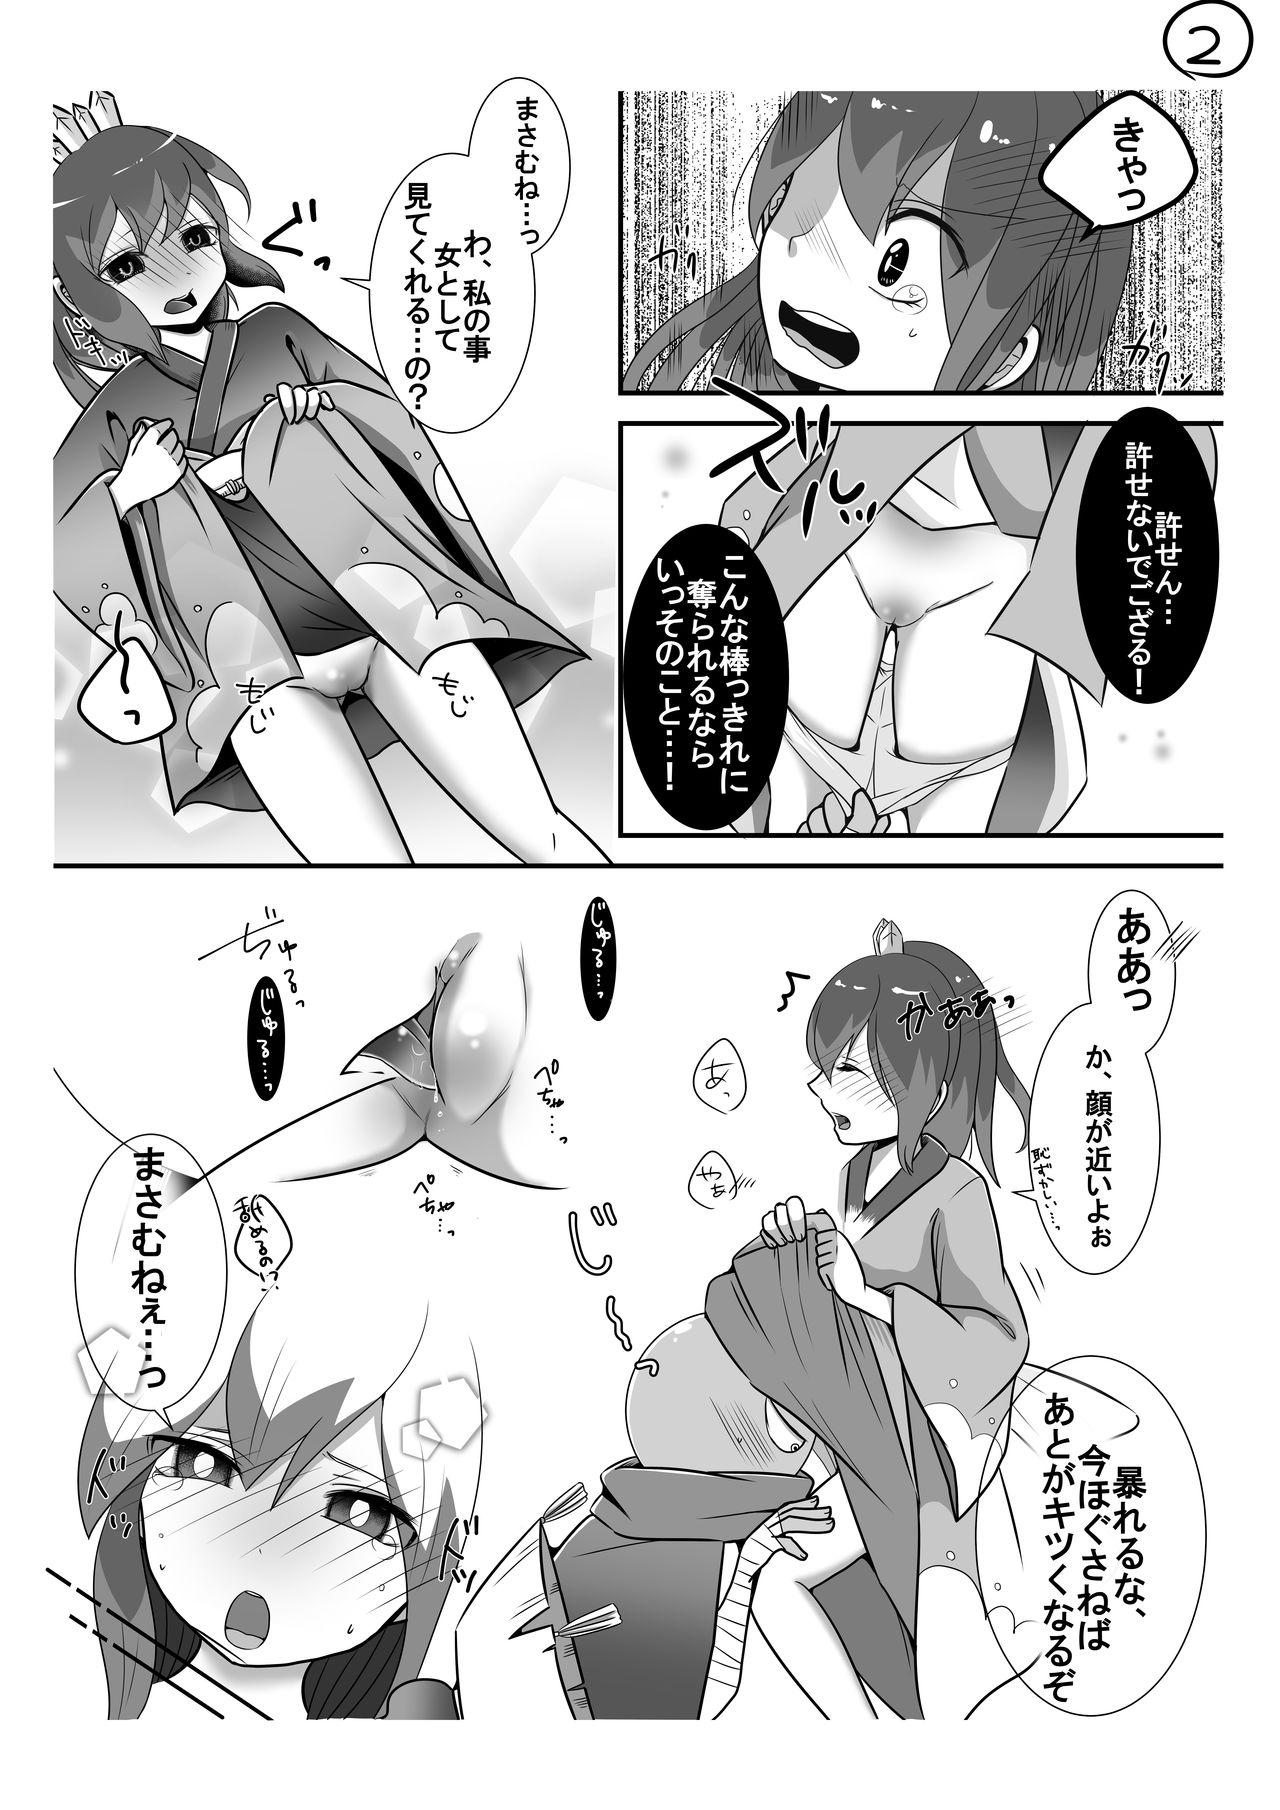 Licking Pussy お題「まさふぶ」 - Youkai watch Babes - Page 2